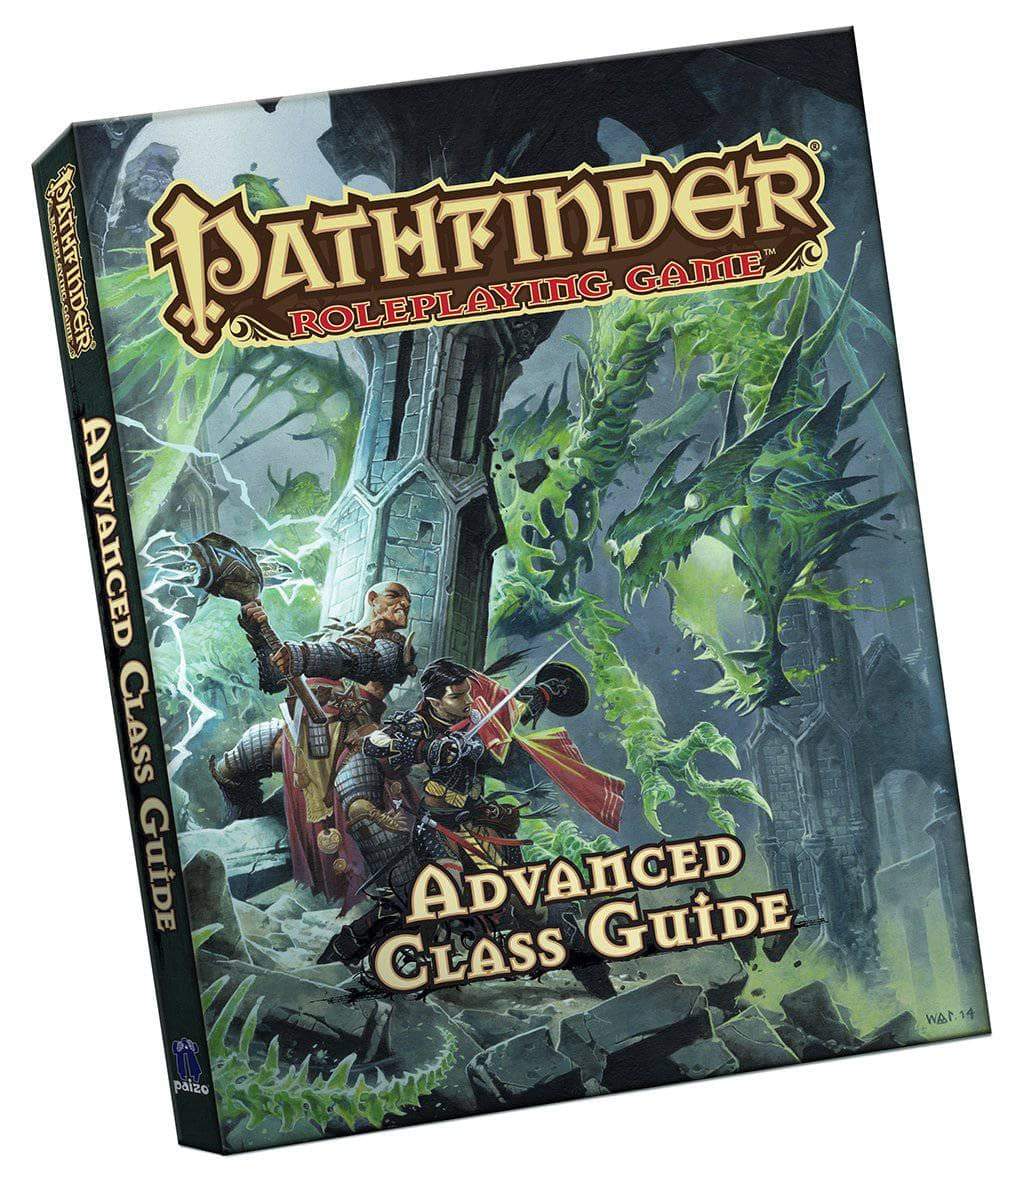 Pathfinder: Rolleplaying Game: Advanced Class Guide Pocket Version (Retail Edition)